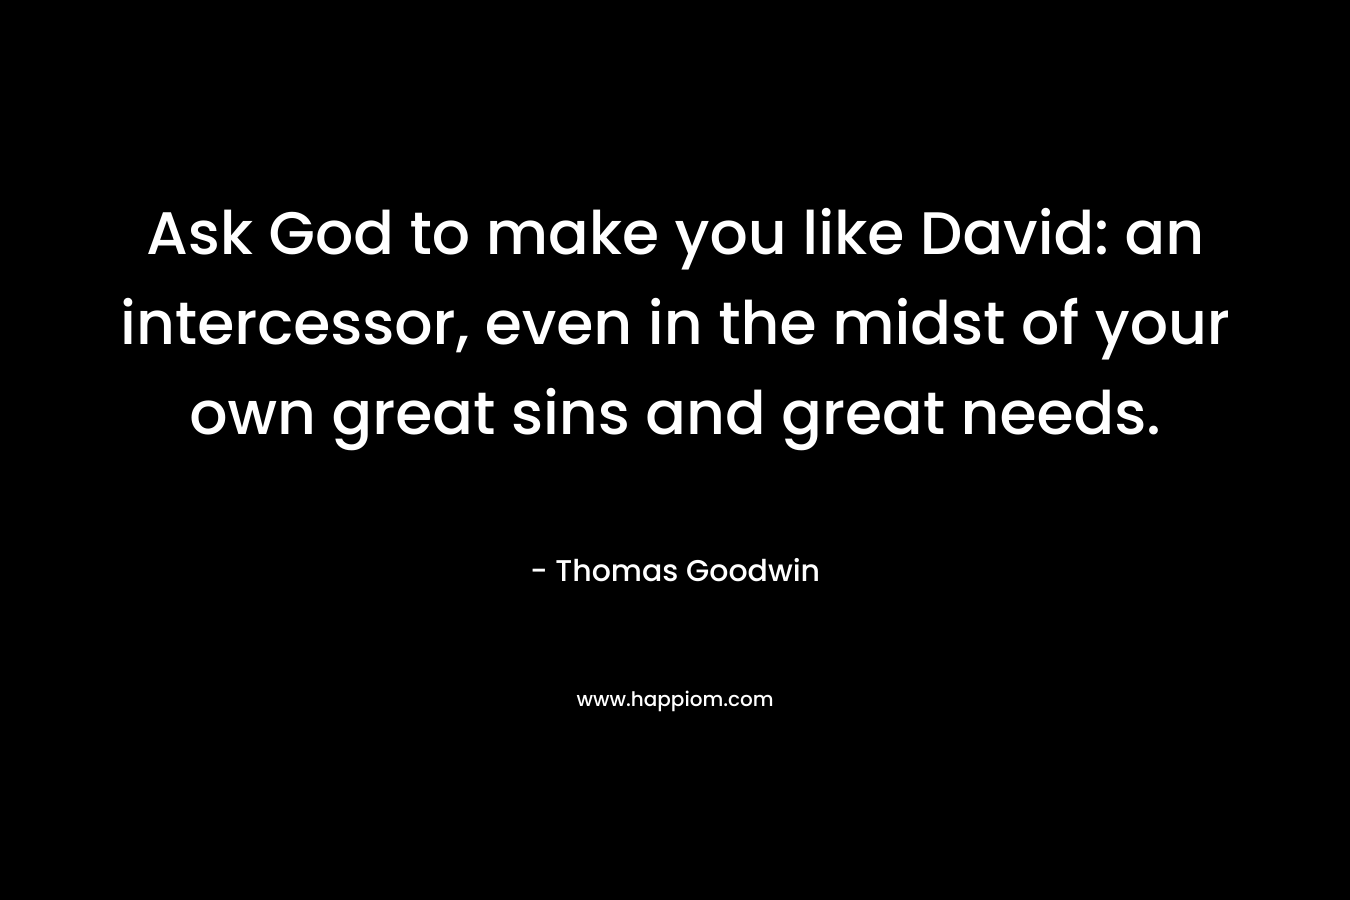 Ask God to make you like David: an intercessor, even in the midst of your own great sins and great needs. – Thomas Goodwin